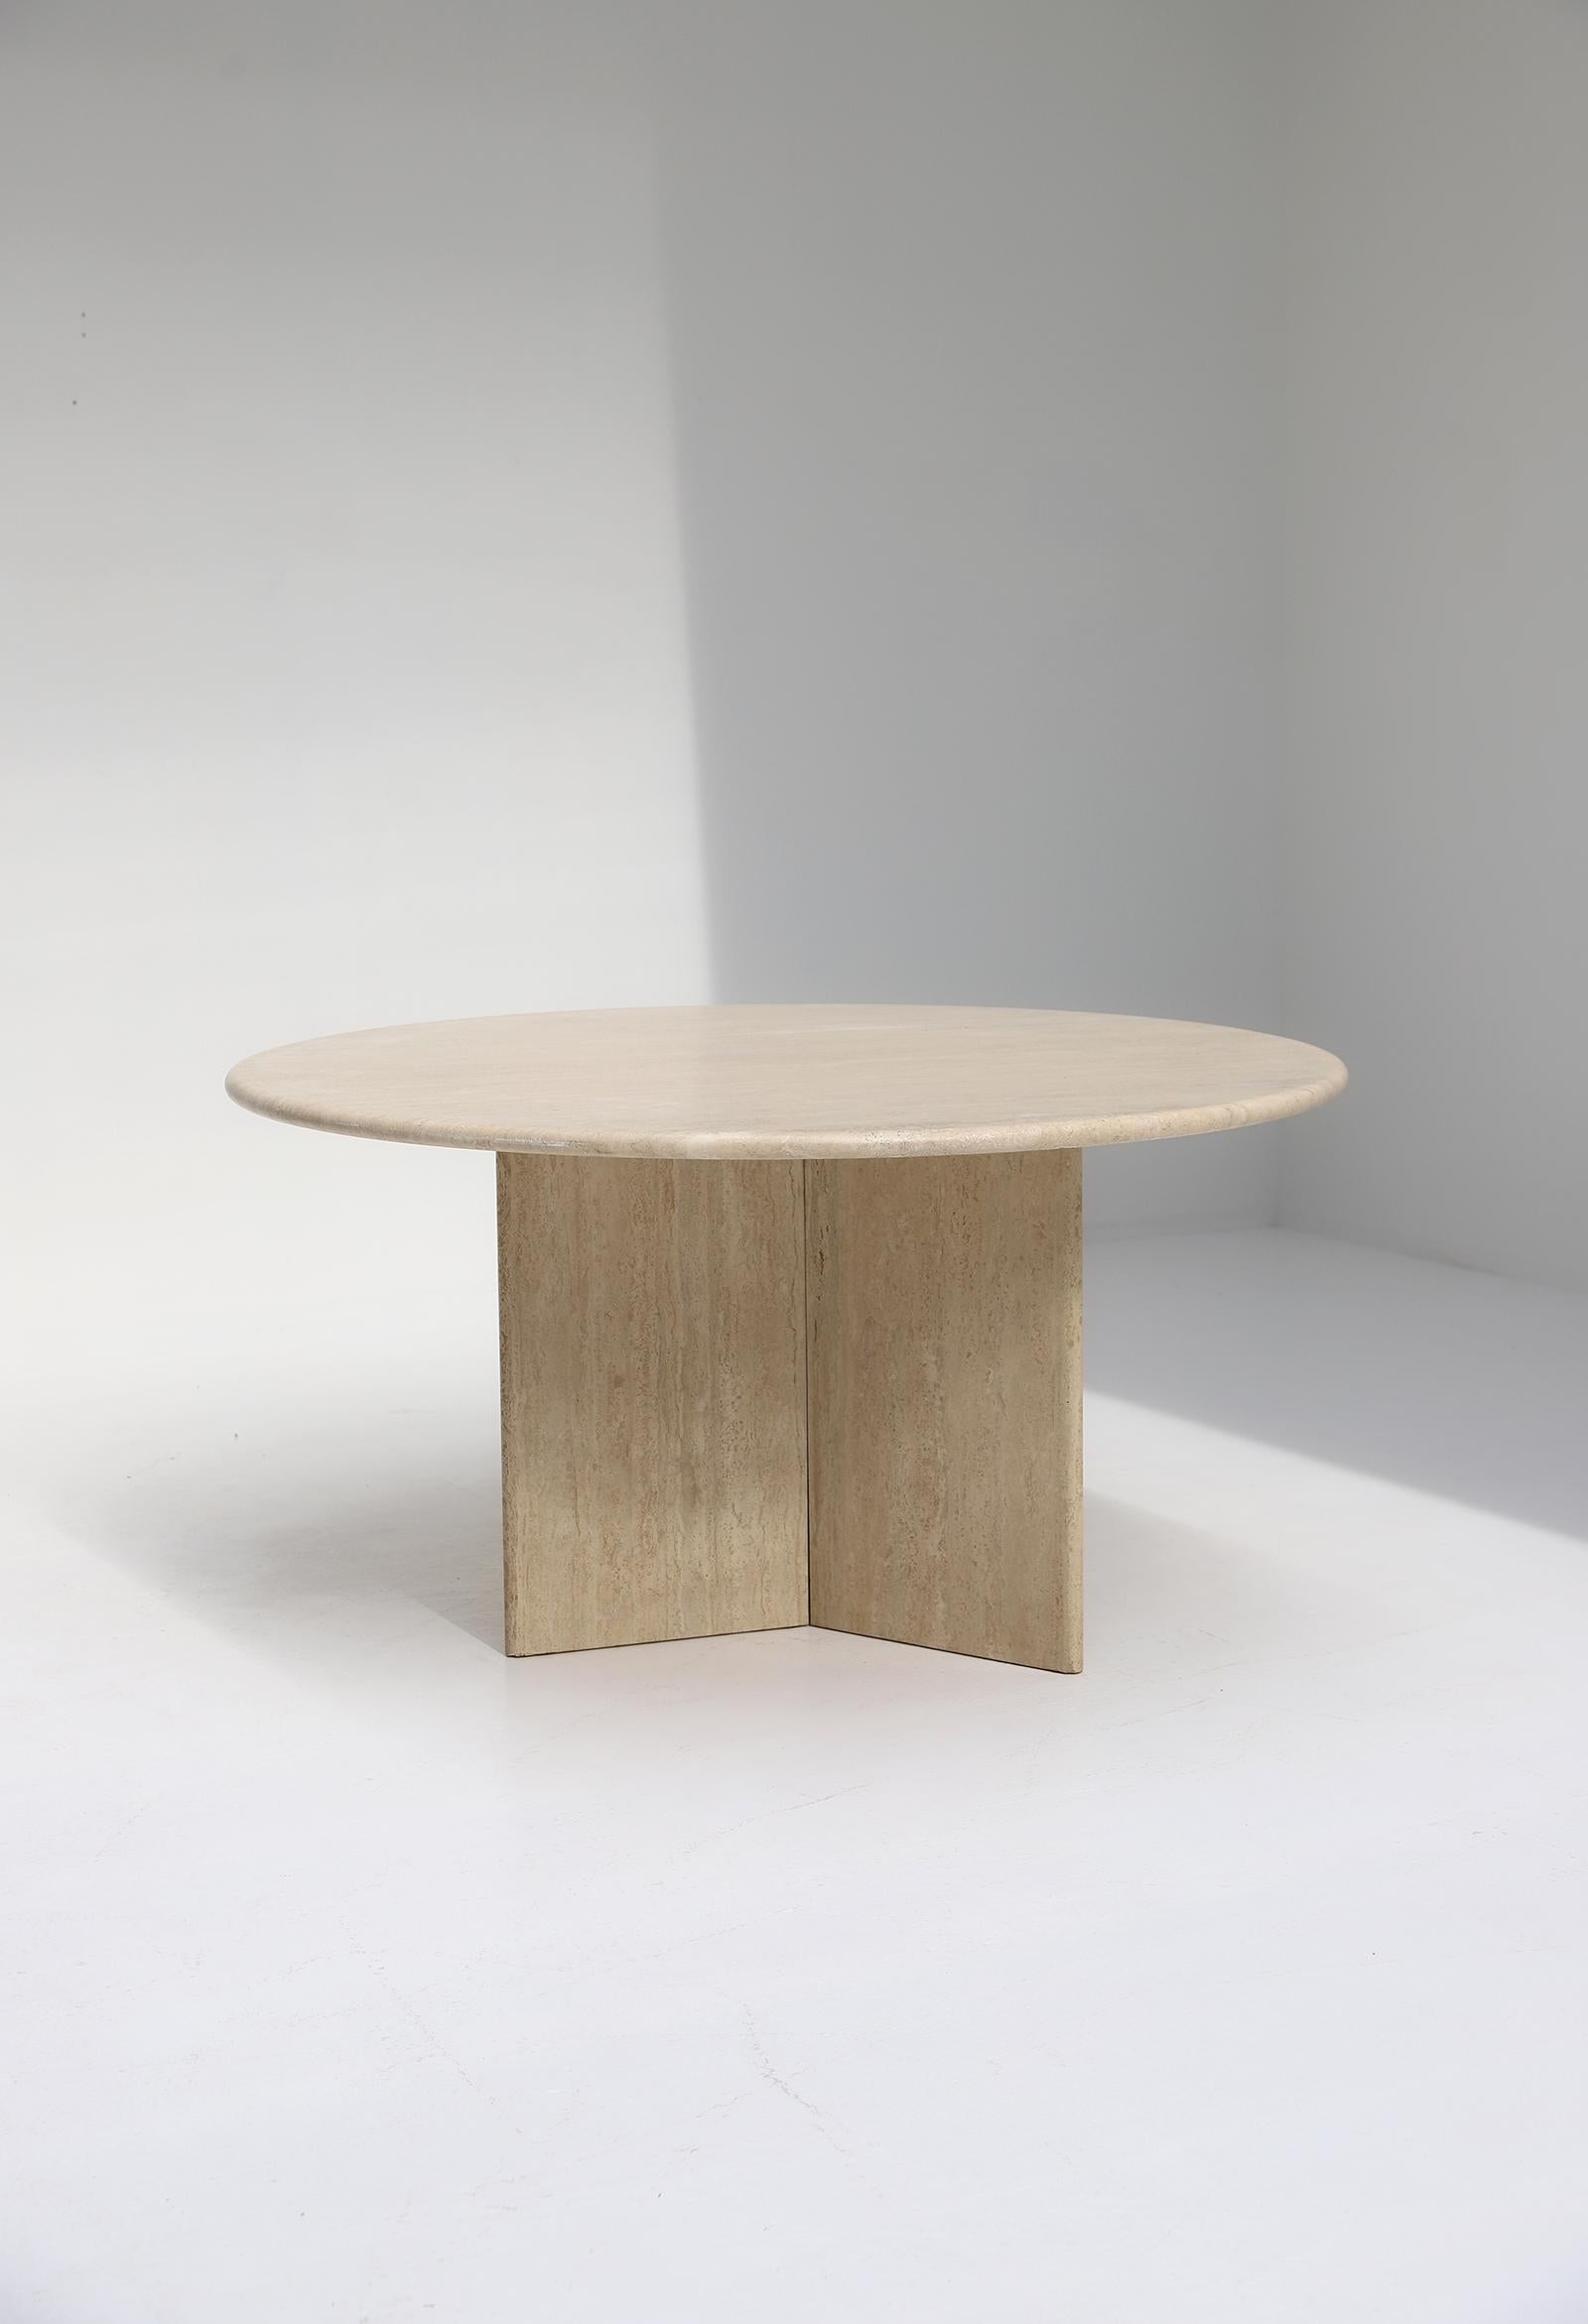 Decorative Travertine Dining Table Designed in the 1970s 2